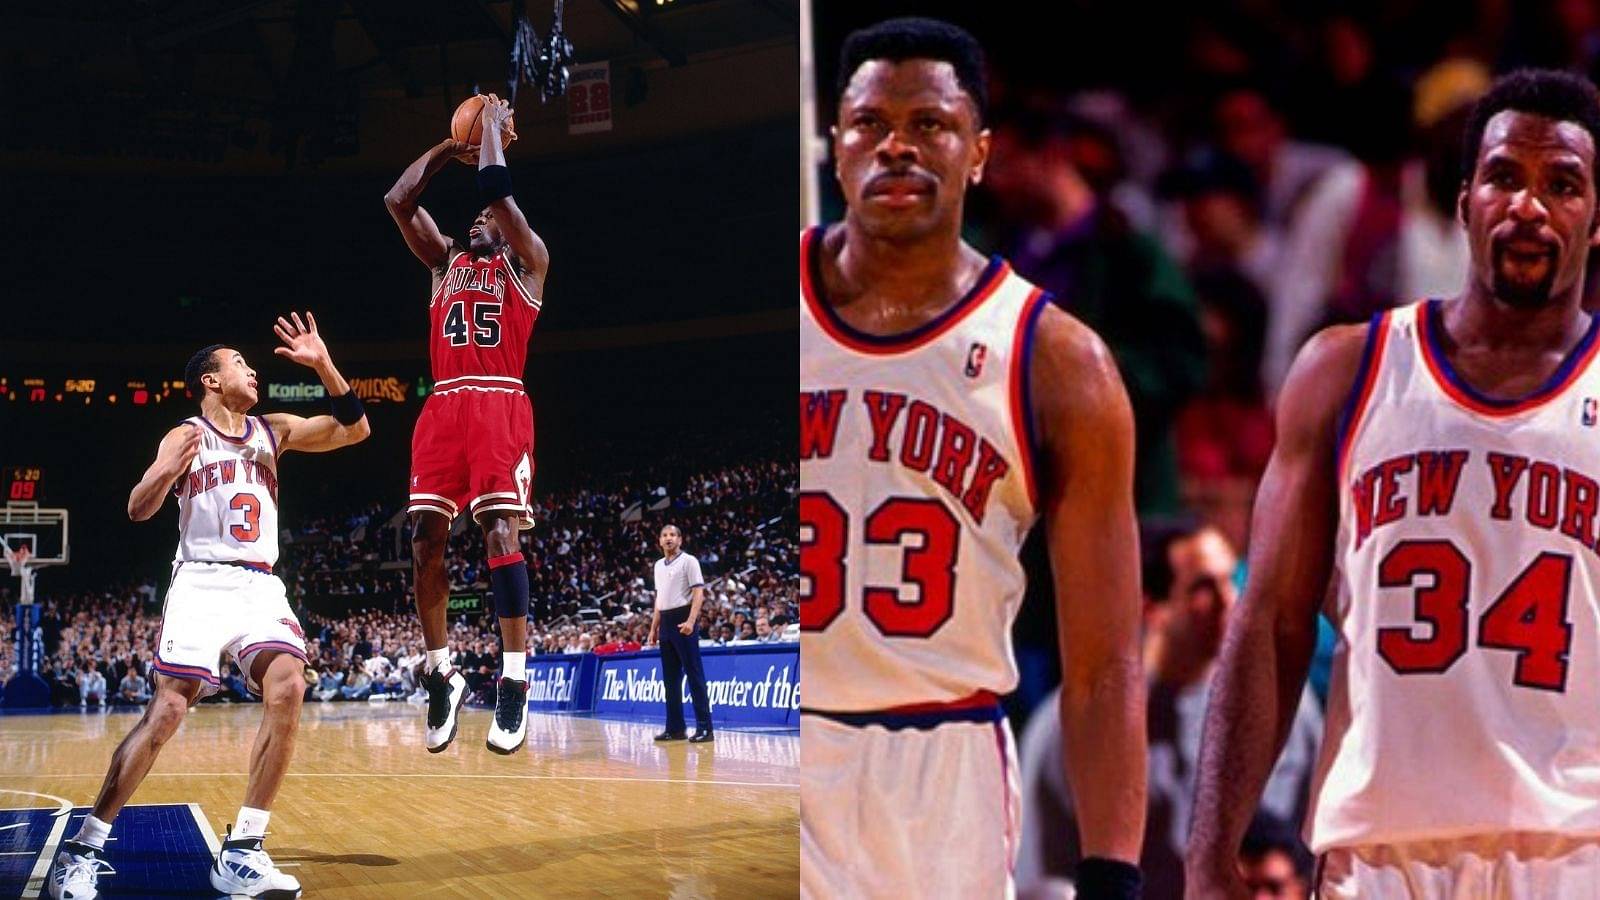 "Michael Jordan did that to John Starks, Charles Oakley AND Patrick Ewing???": When 'His Airness' destroyed the entire Knicks in one play 31-years ago